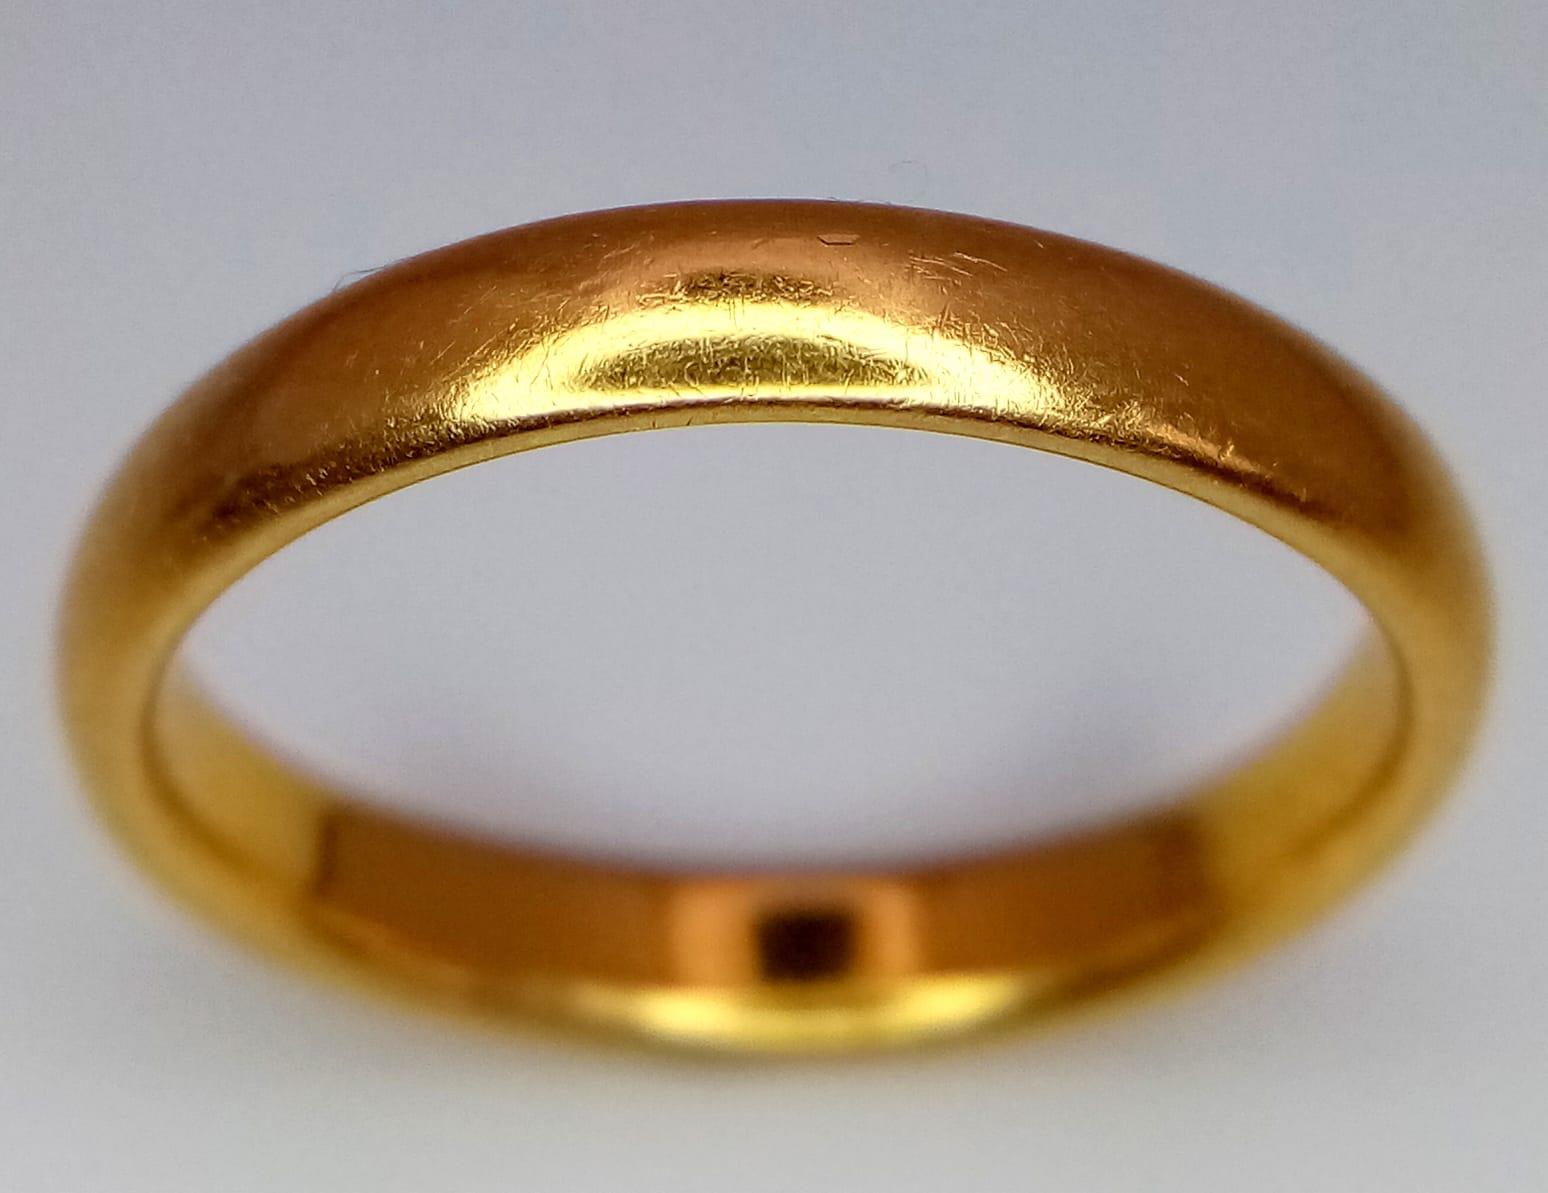 A Vintage 22K Yellow Gold Band Ring. Size P. 5.11g weight. Full UK hallmarks. - Image 2 of 4